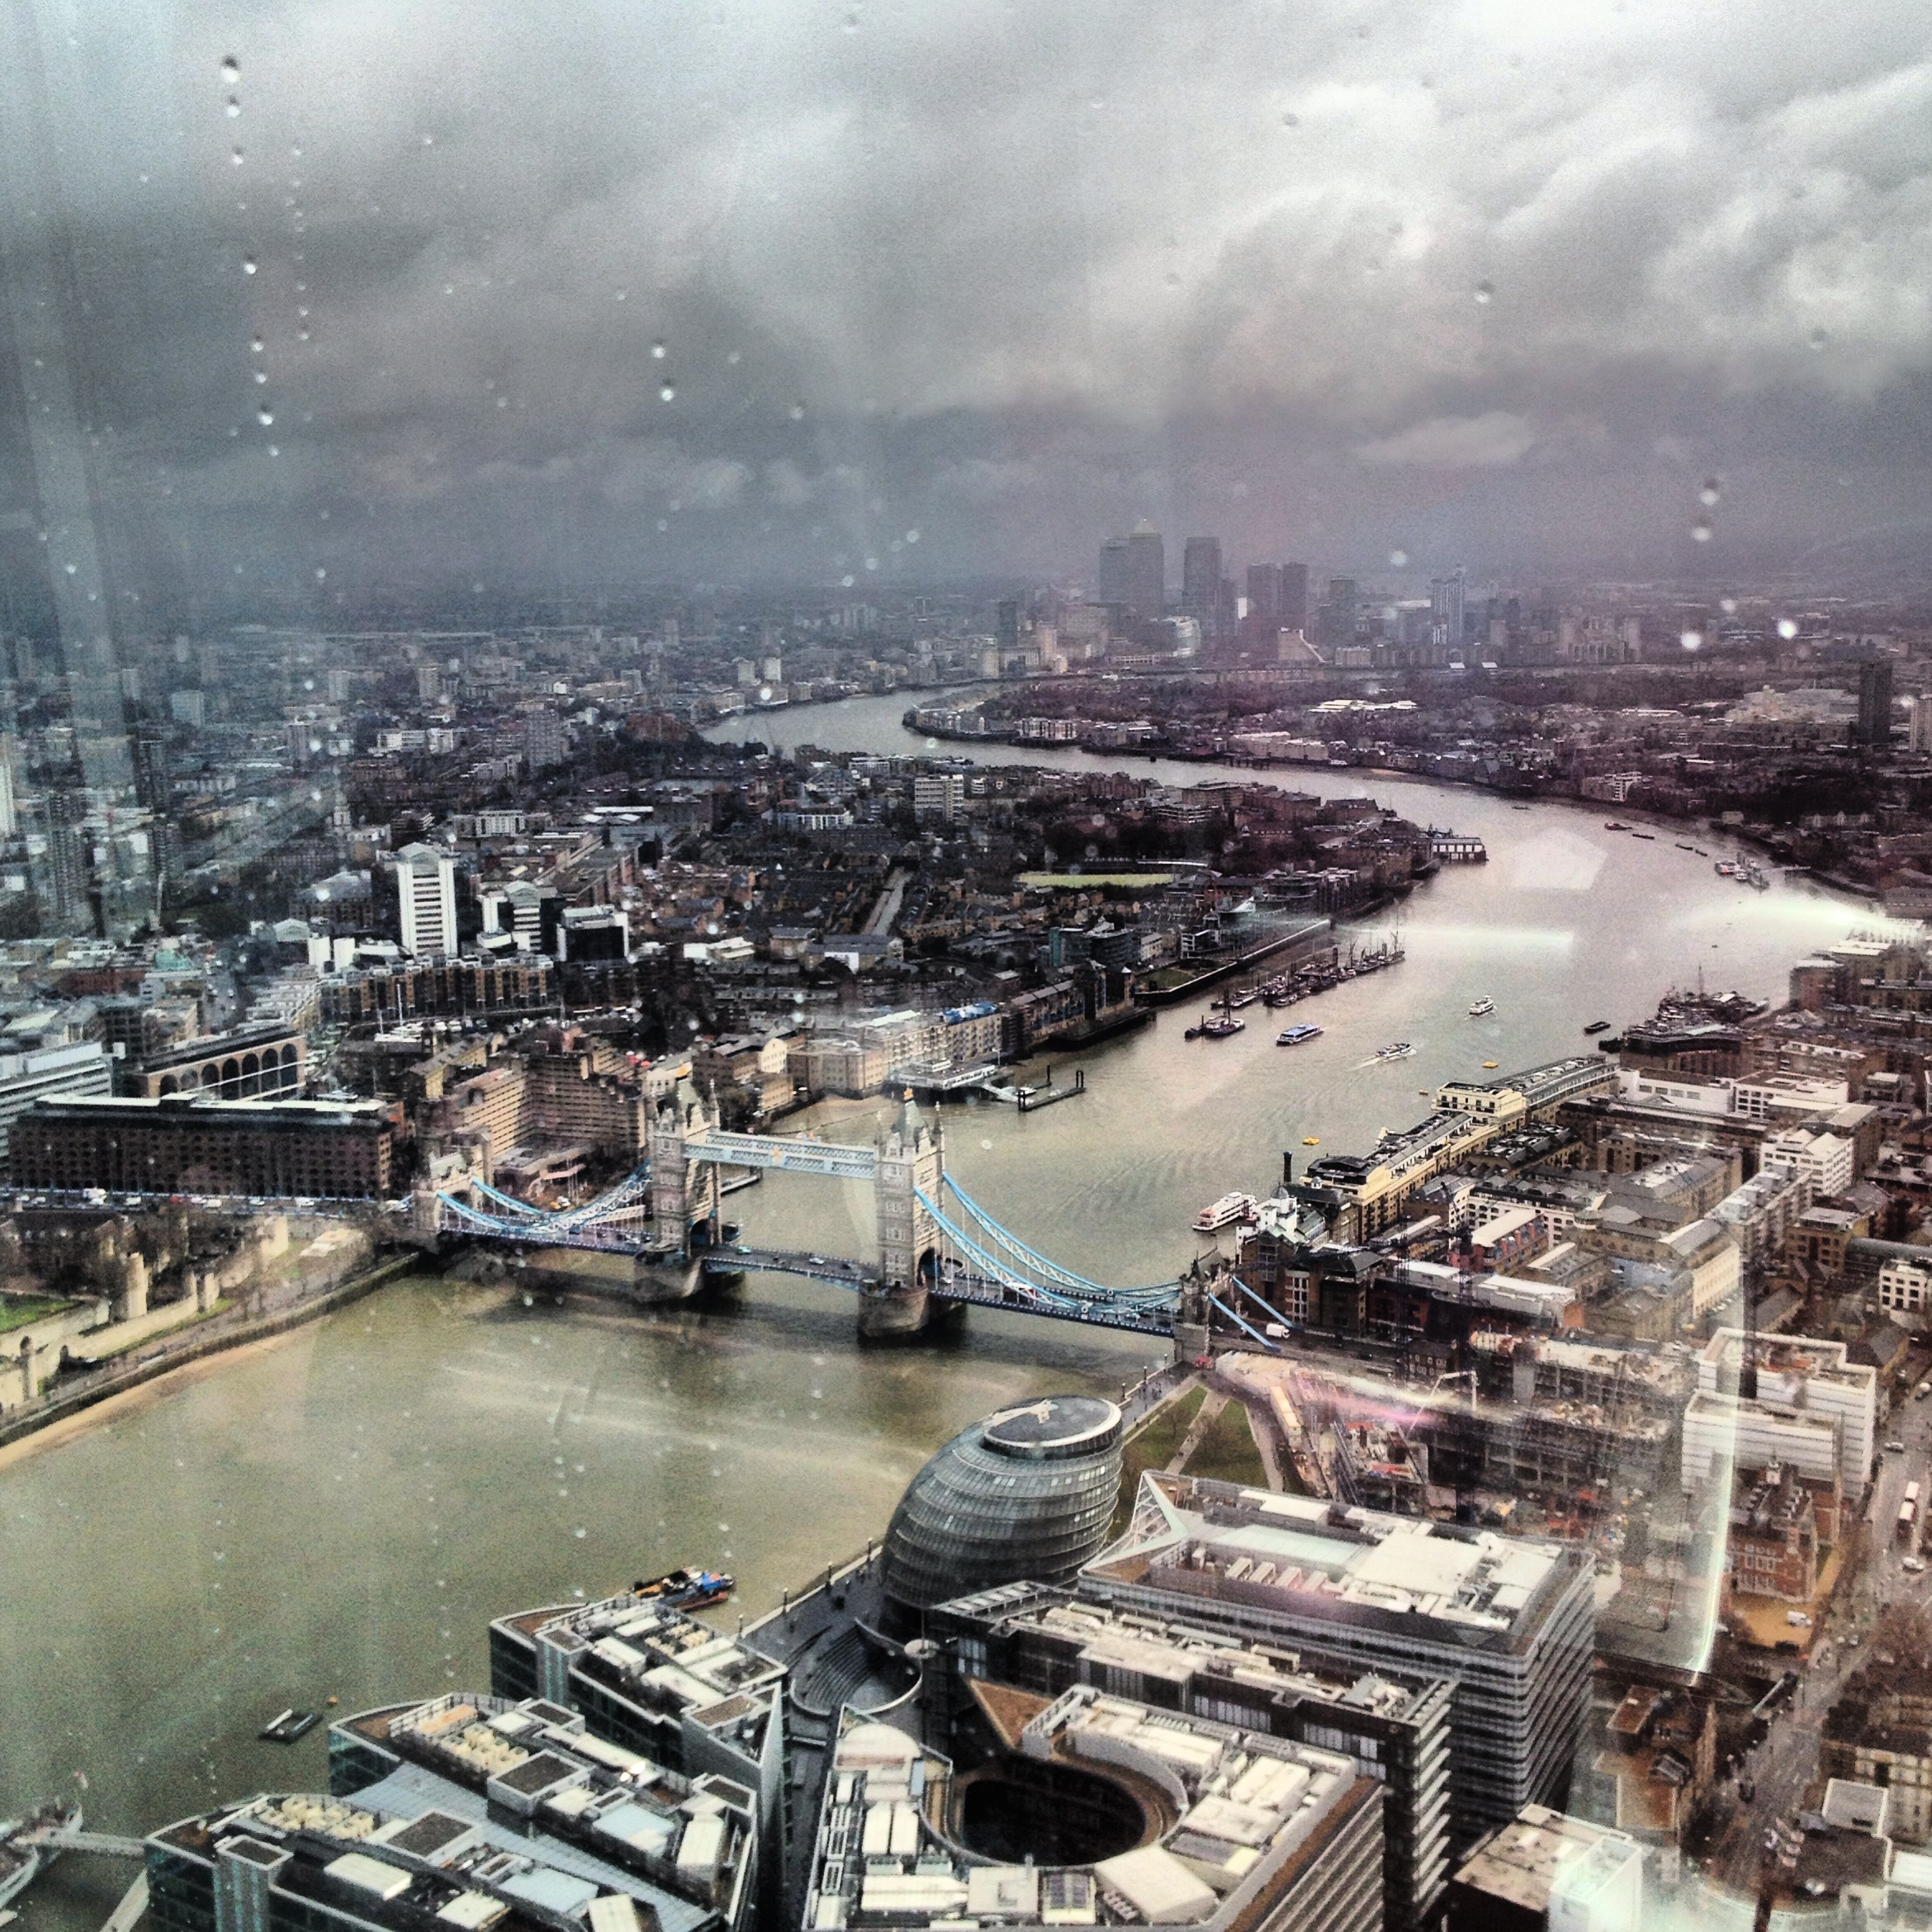 I spent friday with my gorgeous friend Sally and we took our kids up the Shard. Even in awful weather London is still beautiful.